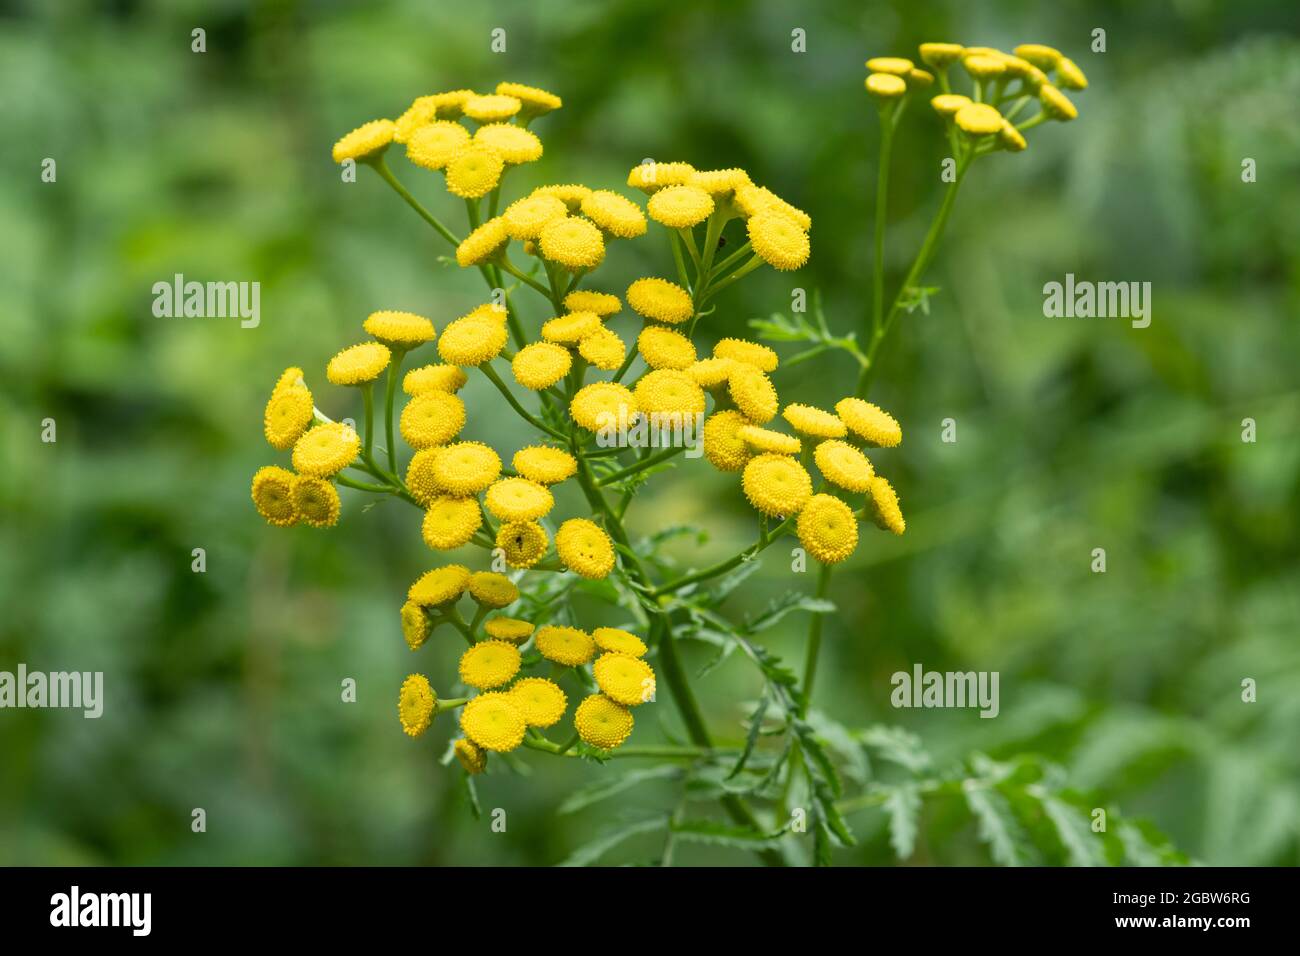 Close-up of tansy flowers (Tanacetum vulgare), a yellow wildflower, flowering during summer or August, UK Stock Photo